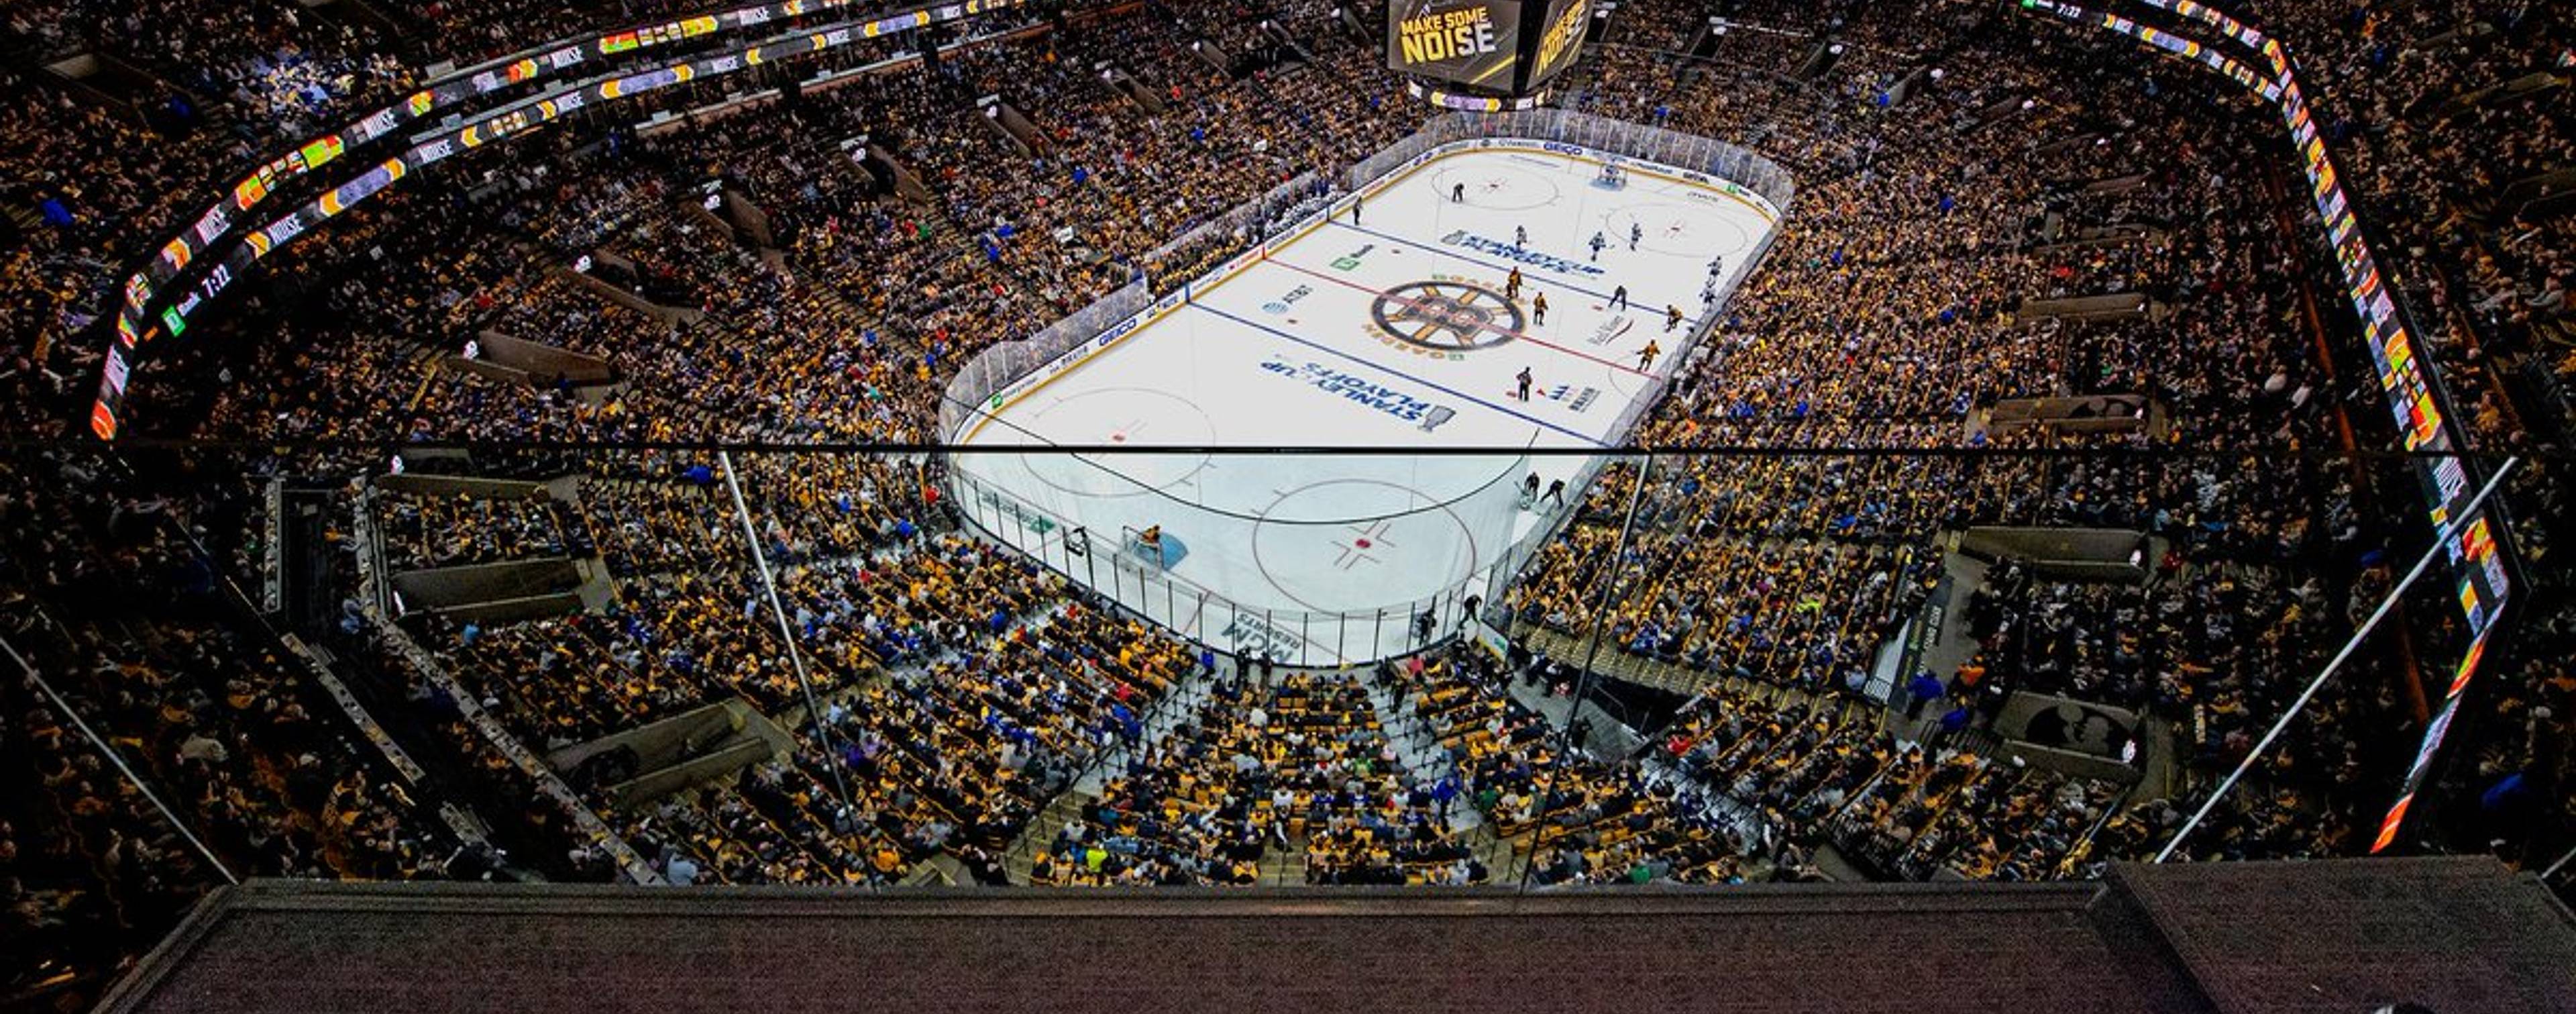 Win a Bruins 6 Game Ticket Package featured image